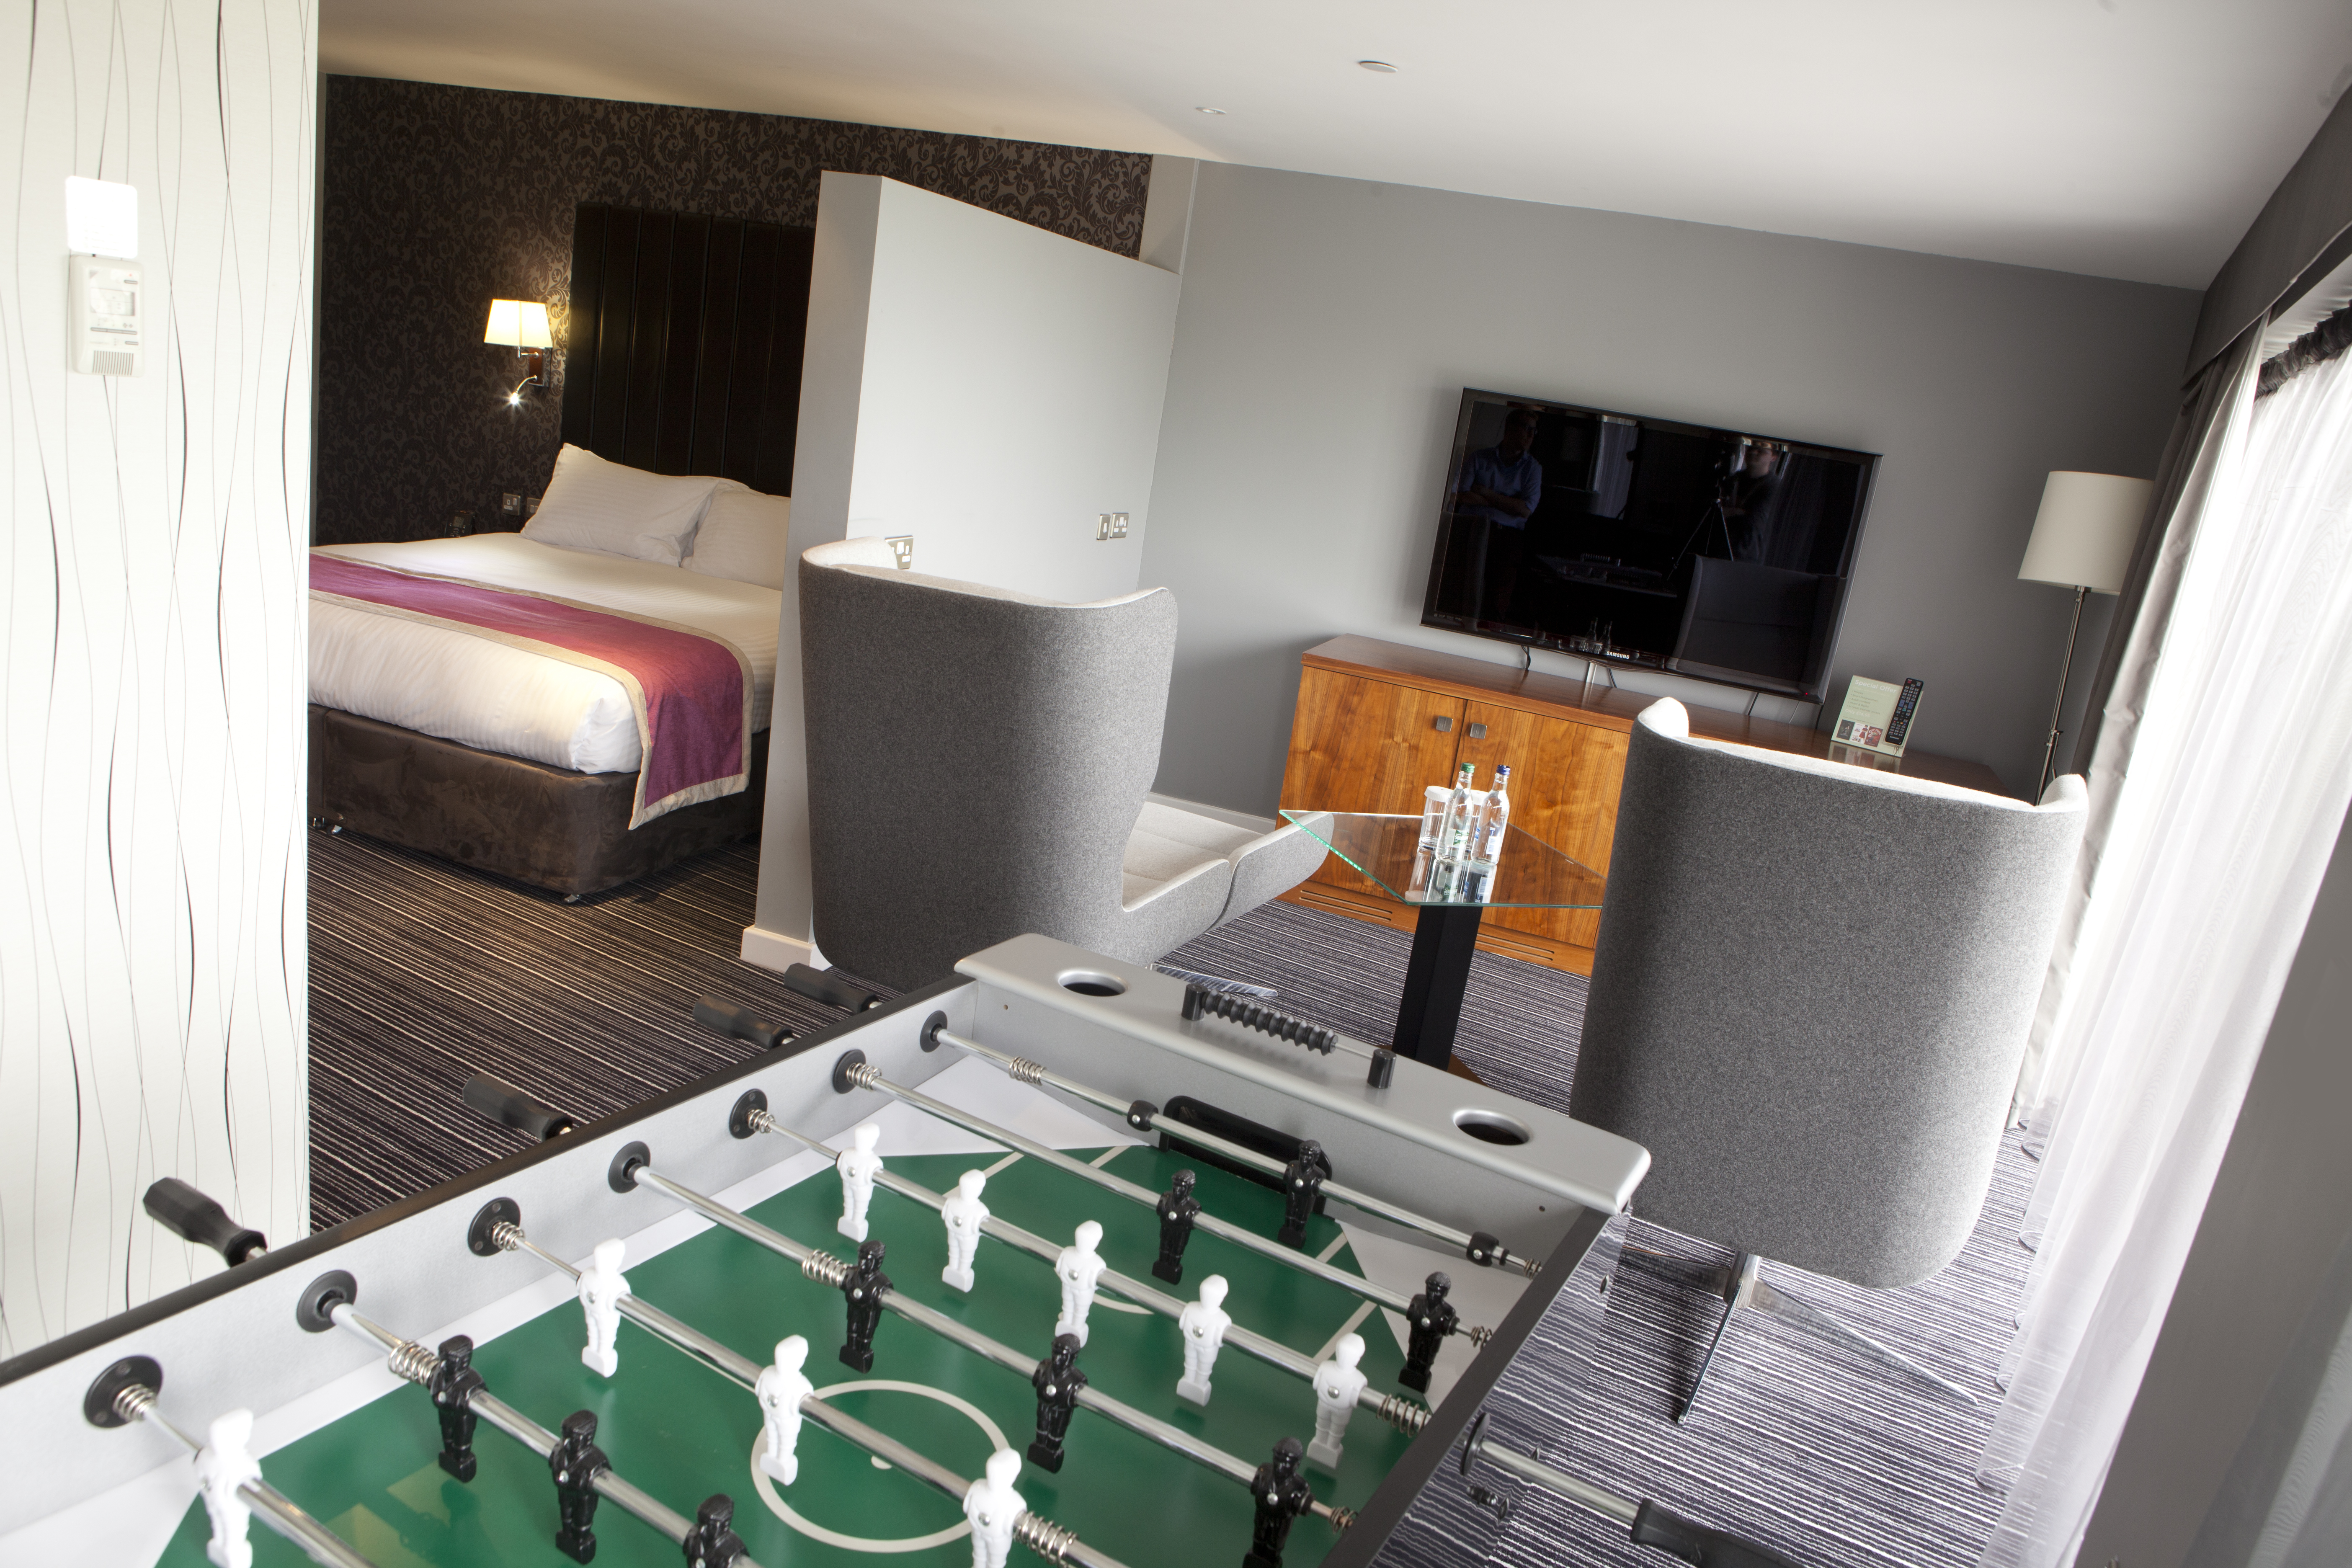  Panoramic Suite With Illuminated Lamp by Bed Behind Partition, Living Area With TV, Two Grey Armchairs, and Sheer Drapes by Balcony With a View, and Foosball Table